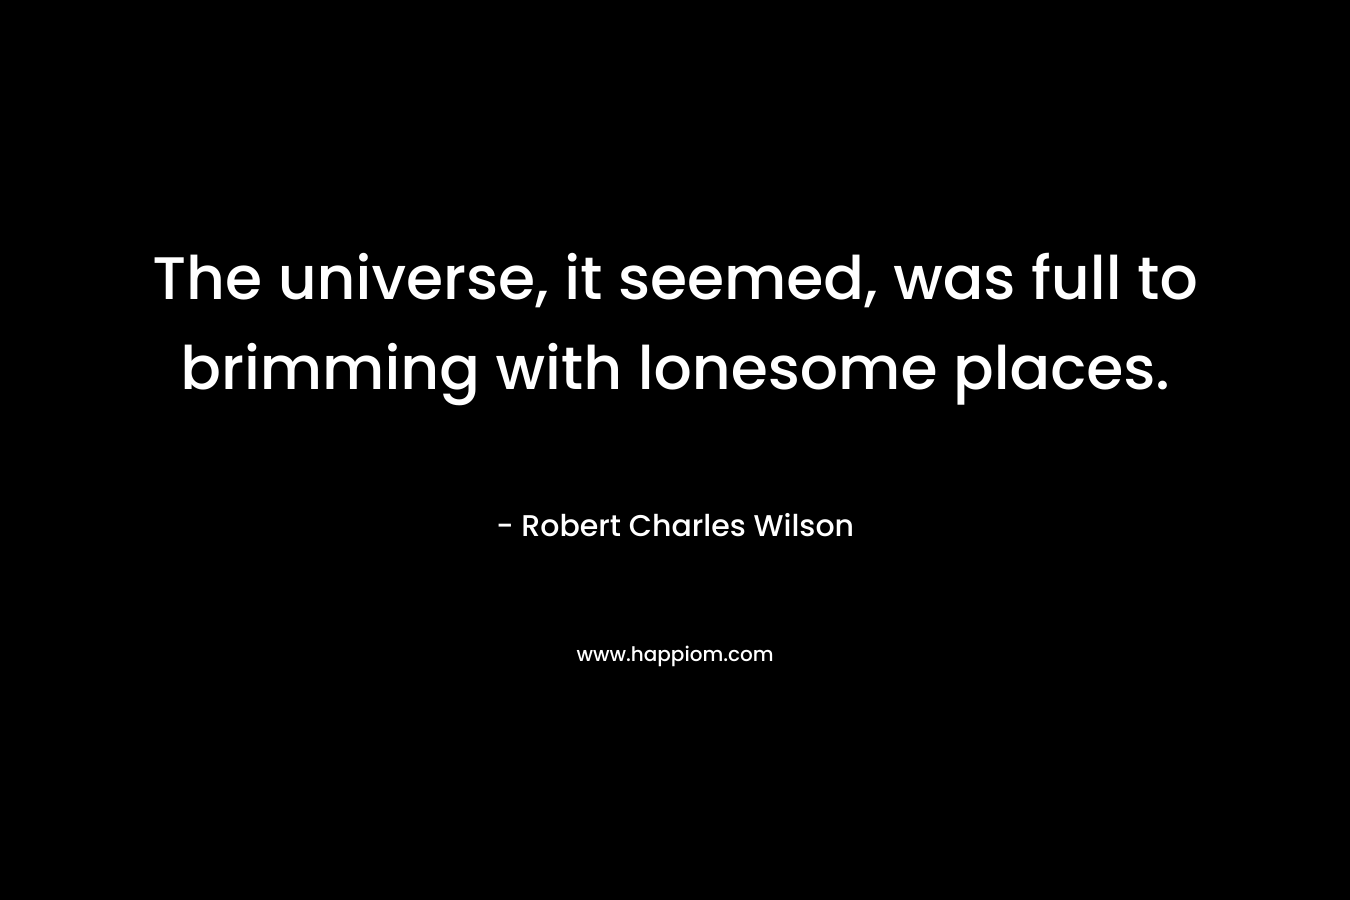 The universe, it seemed, was full to brimming with lonesome places. – Robert Charles Wilson